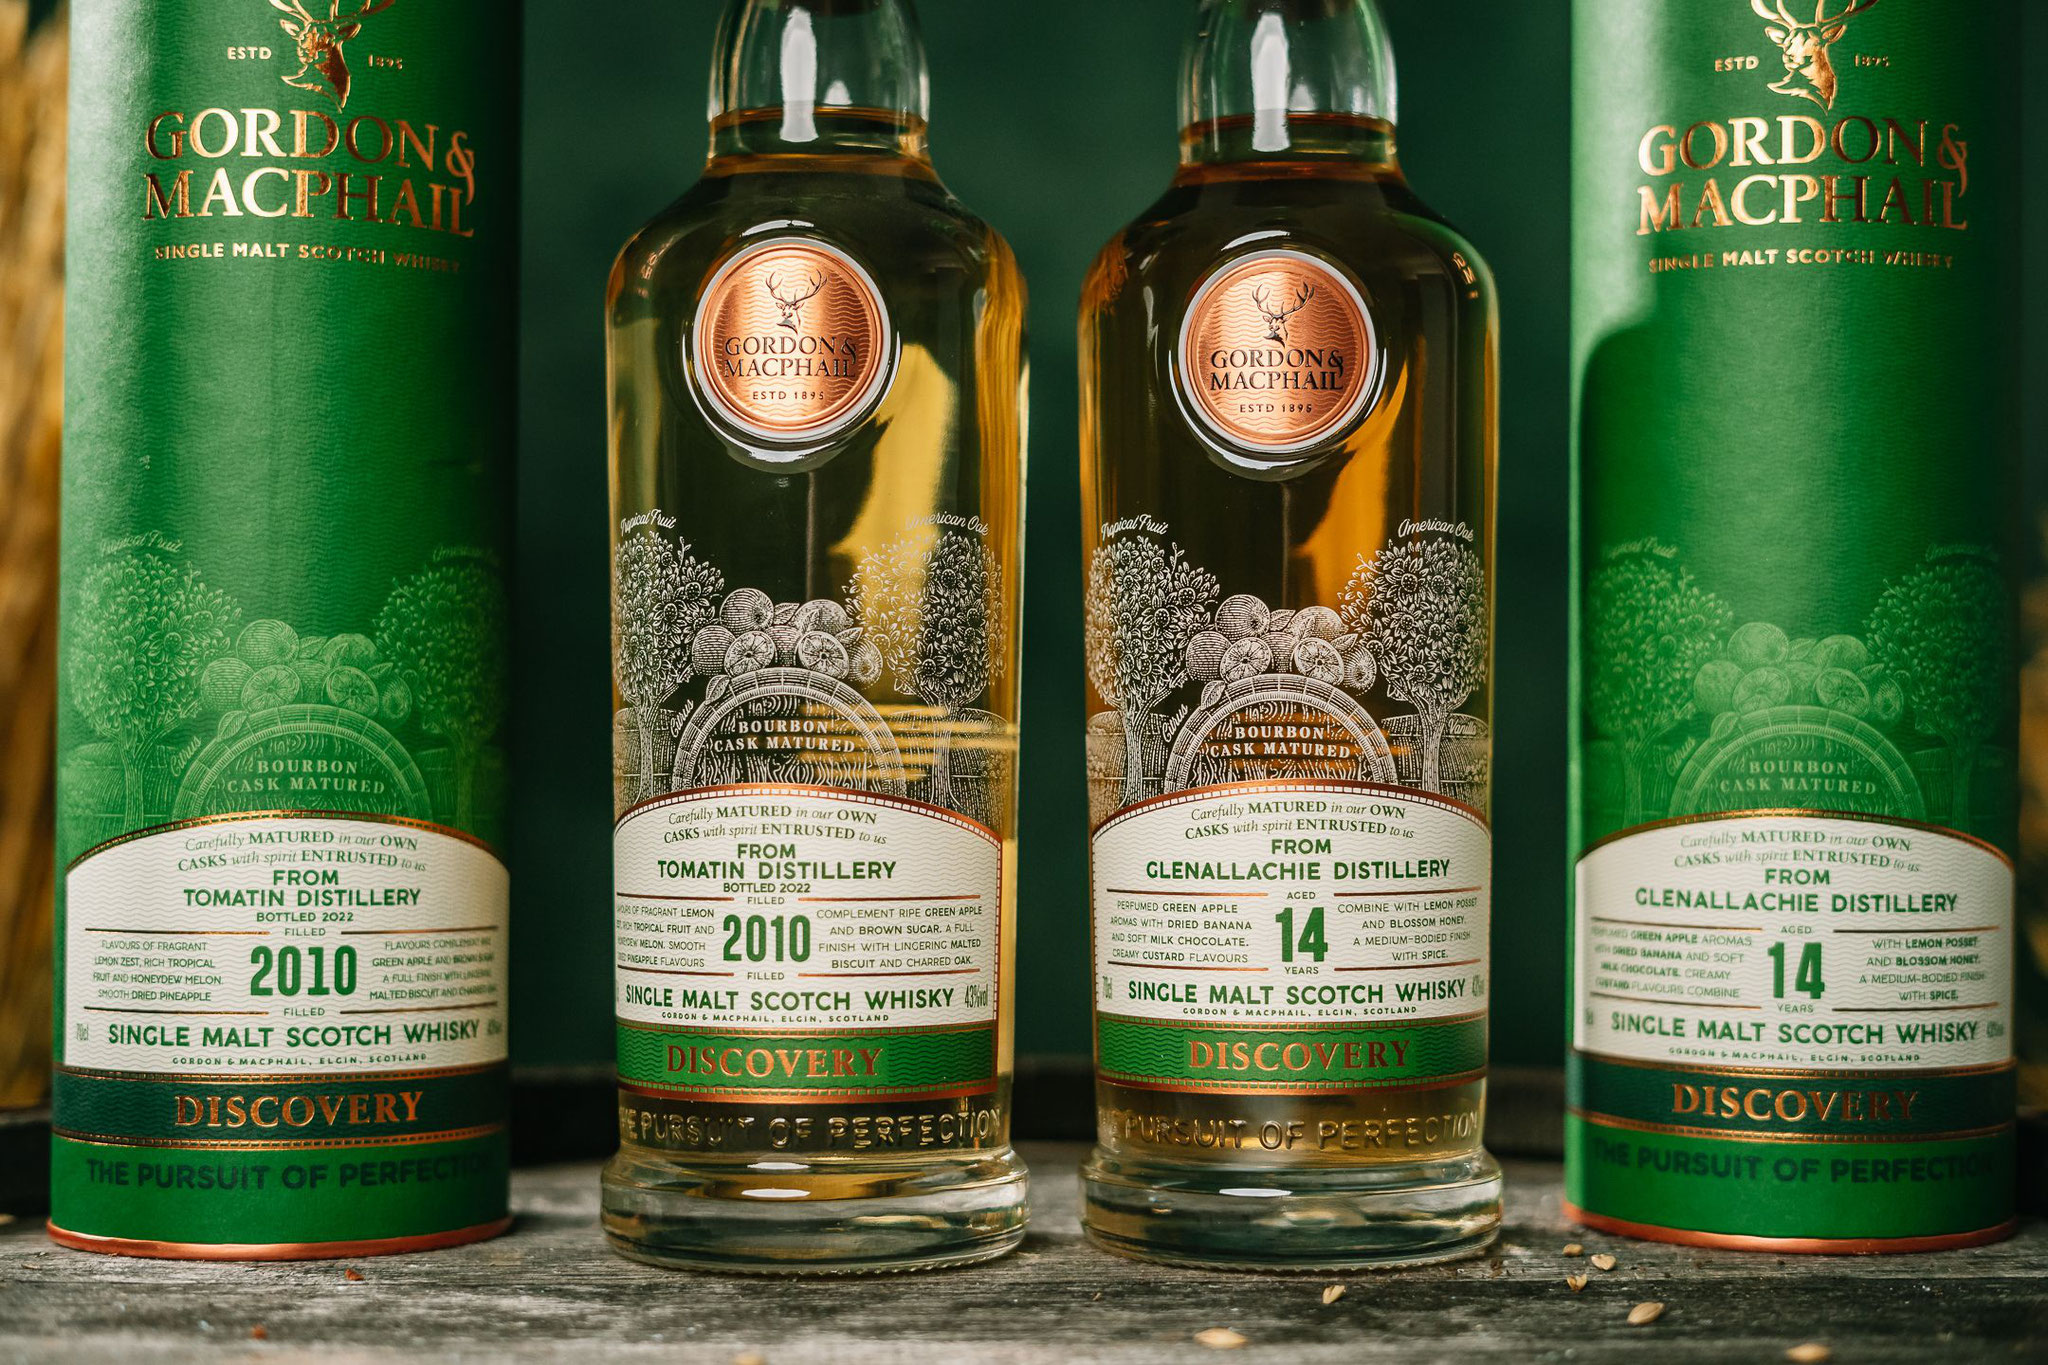 To discover: two new Bourbon Cask Matured expressions from Gordon & MacPhail's Discovery Range